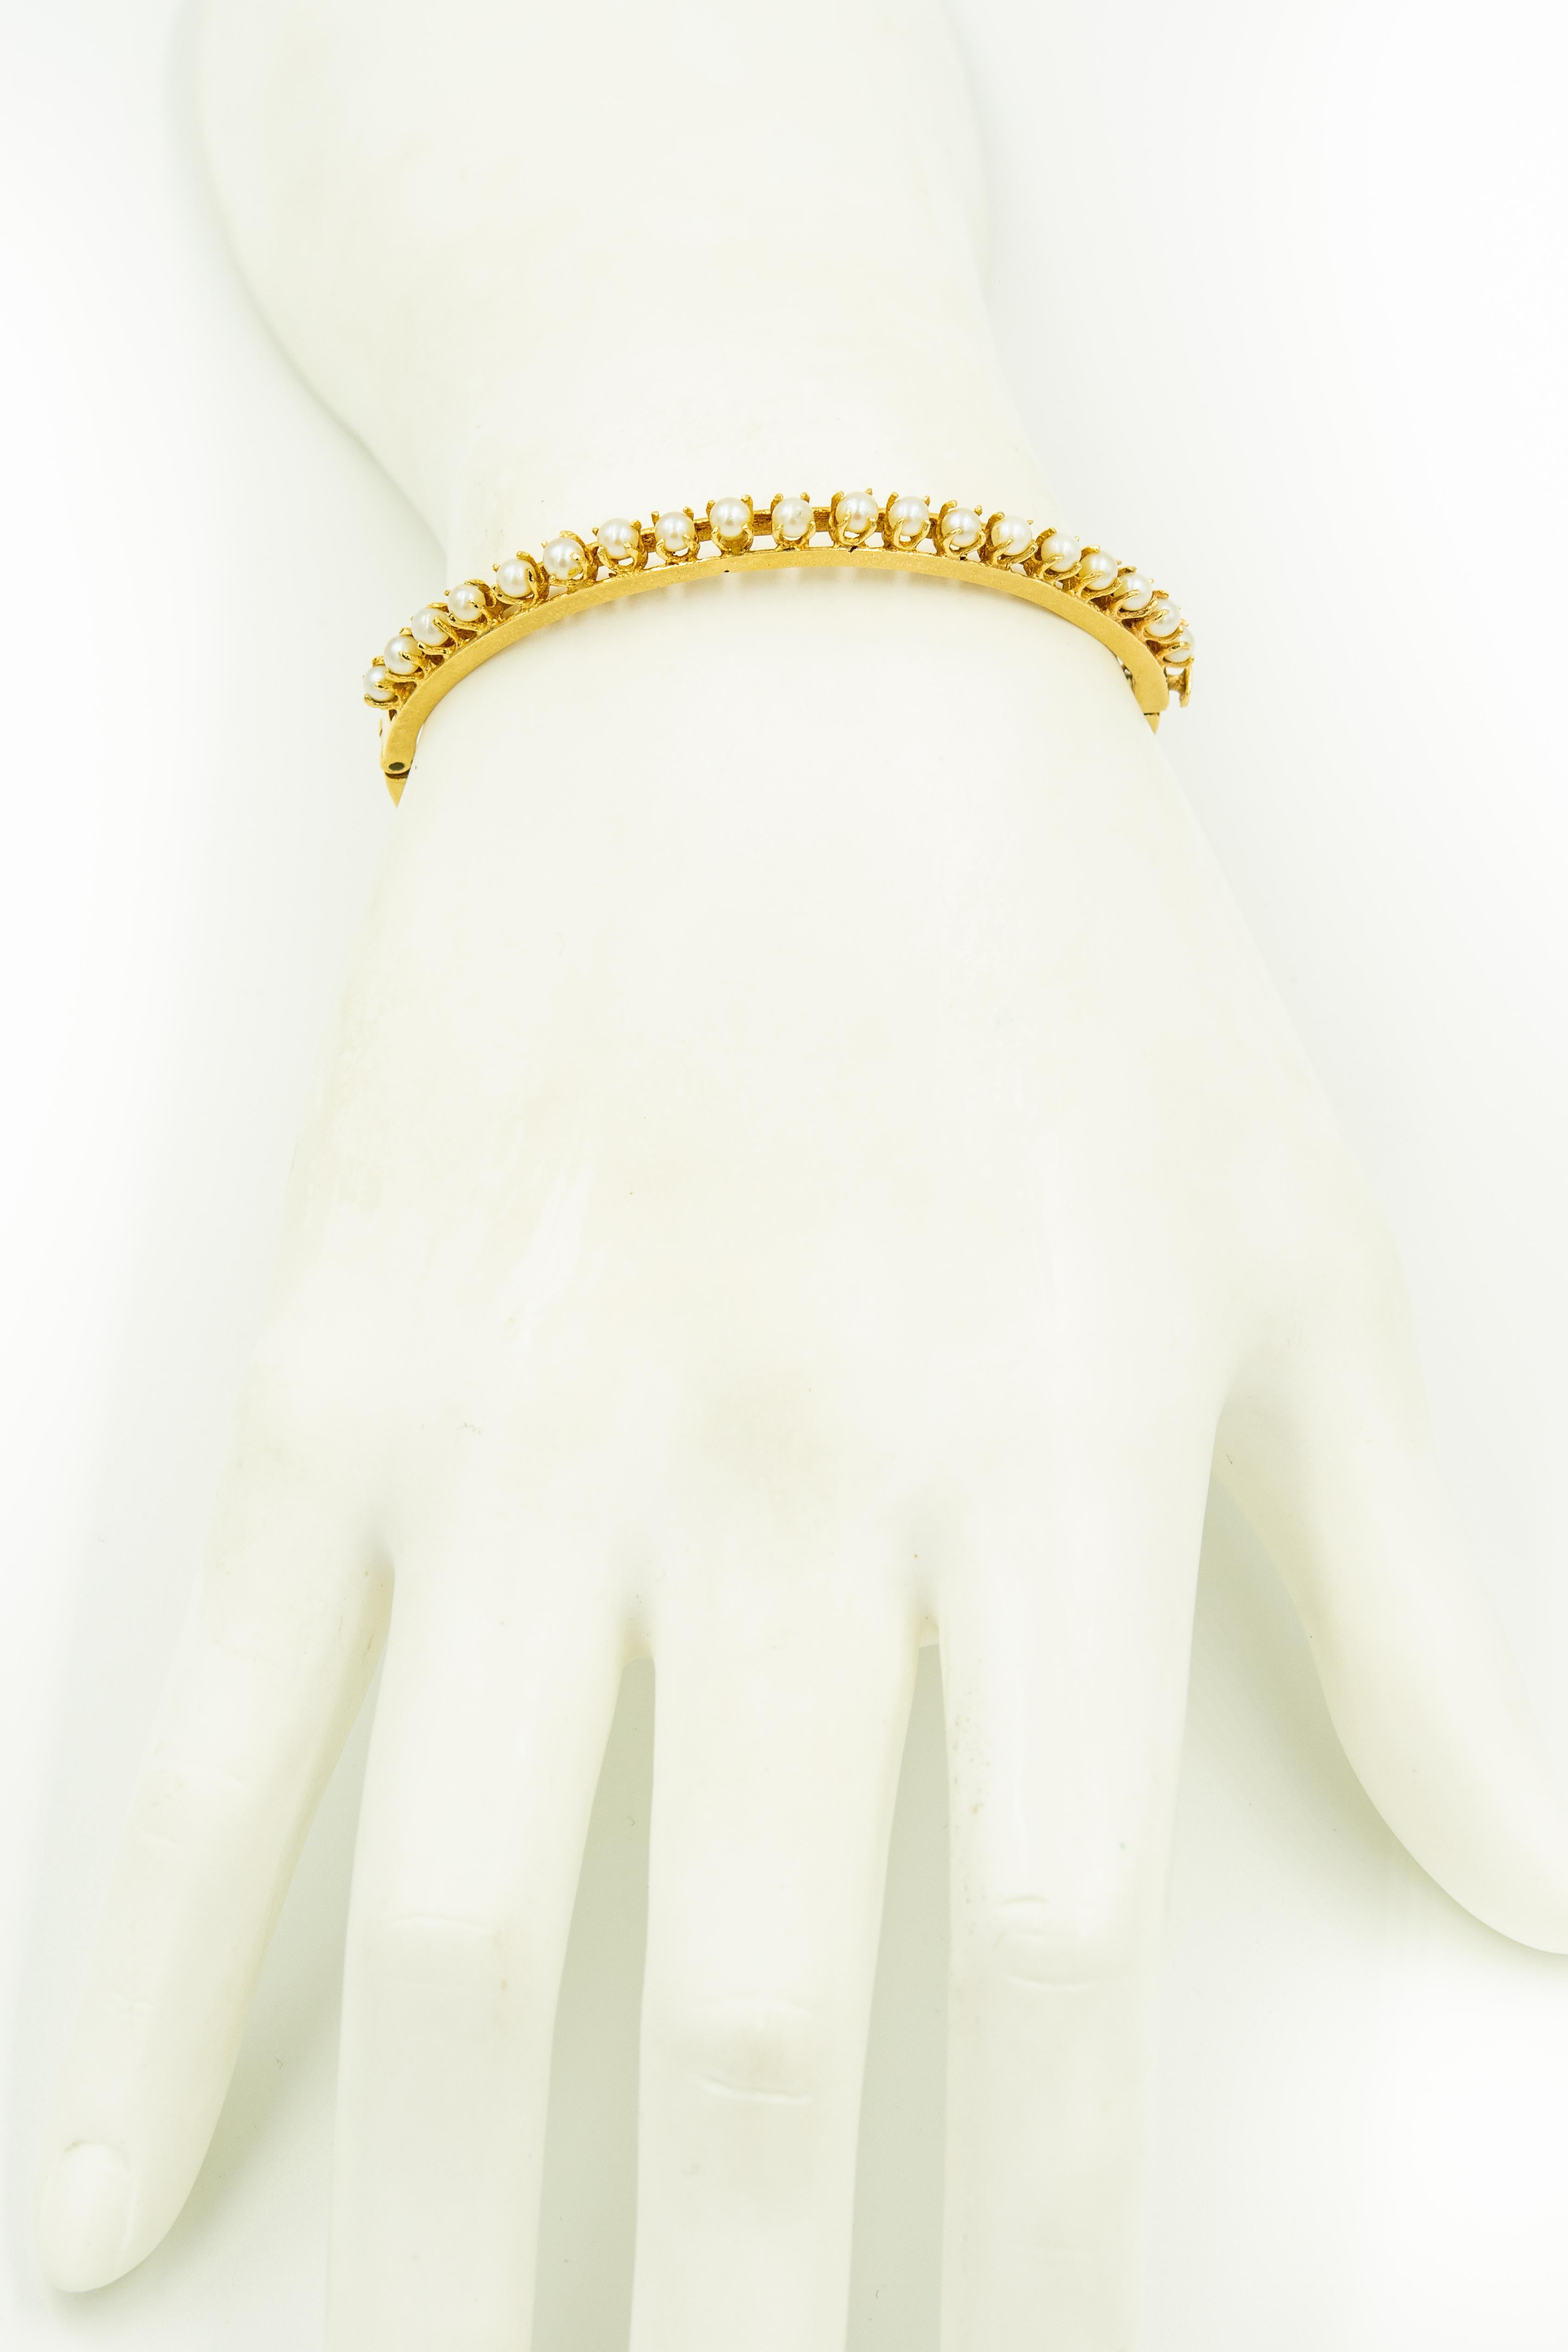 1950s Cultured Pearl Yellow Gold Bangle Bracelet 3